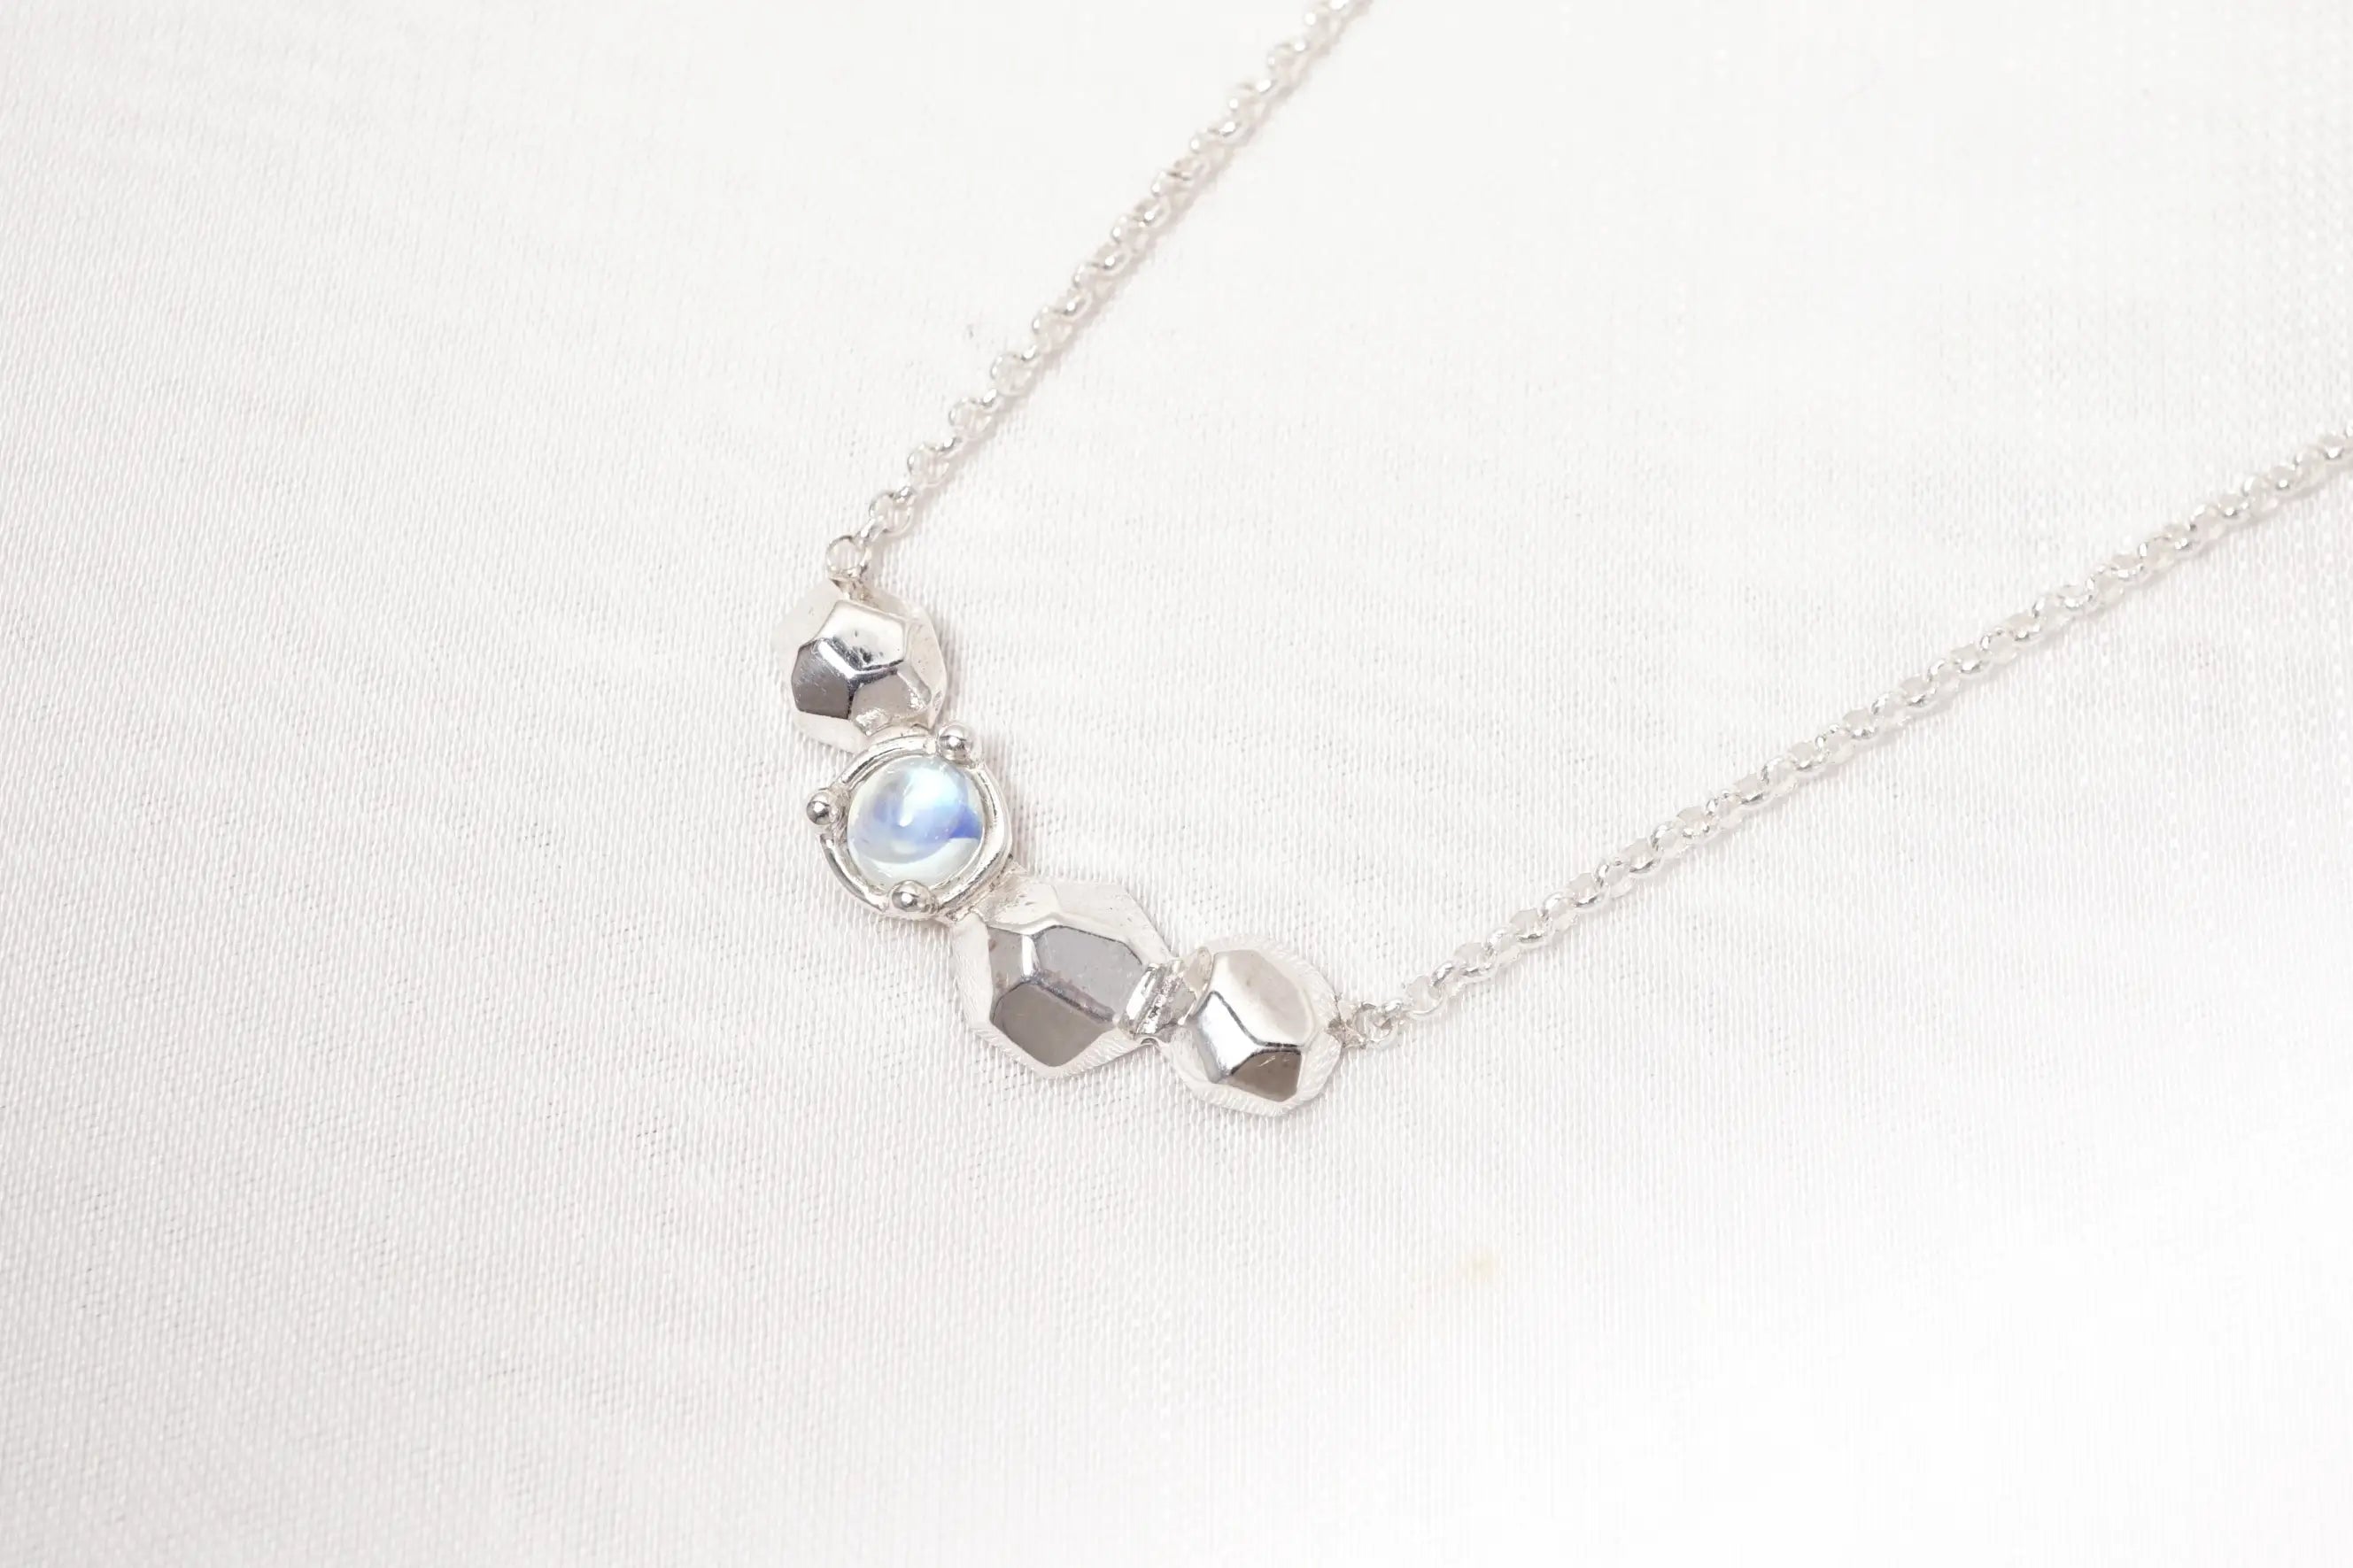 Chia Jewelry gem stones everyday necklaces design collection. One of a kind silver moonstone necklace and pendant.